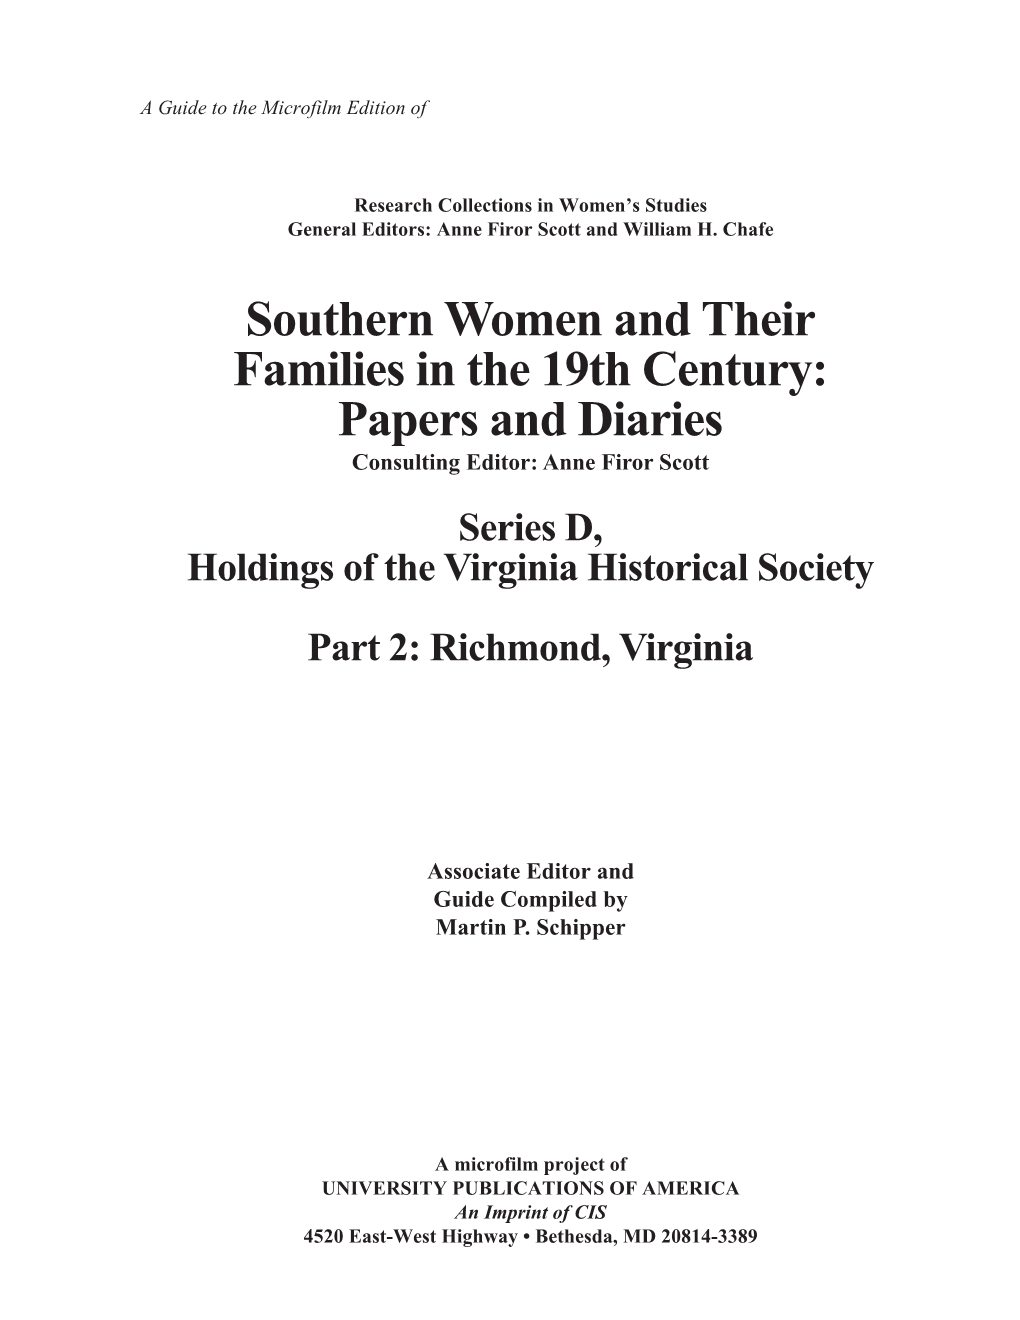 Southern Women and Their Families in the 19Th Century: Papers and Diaries